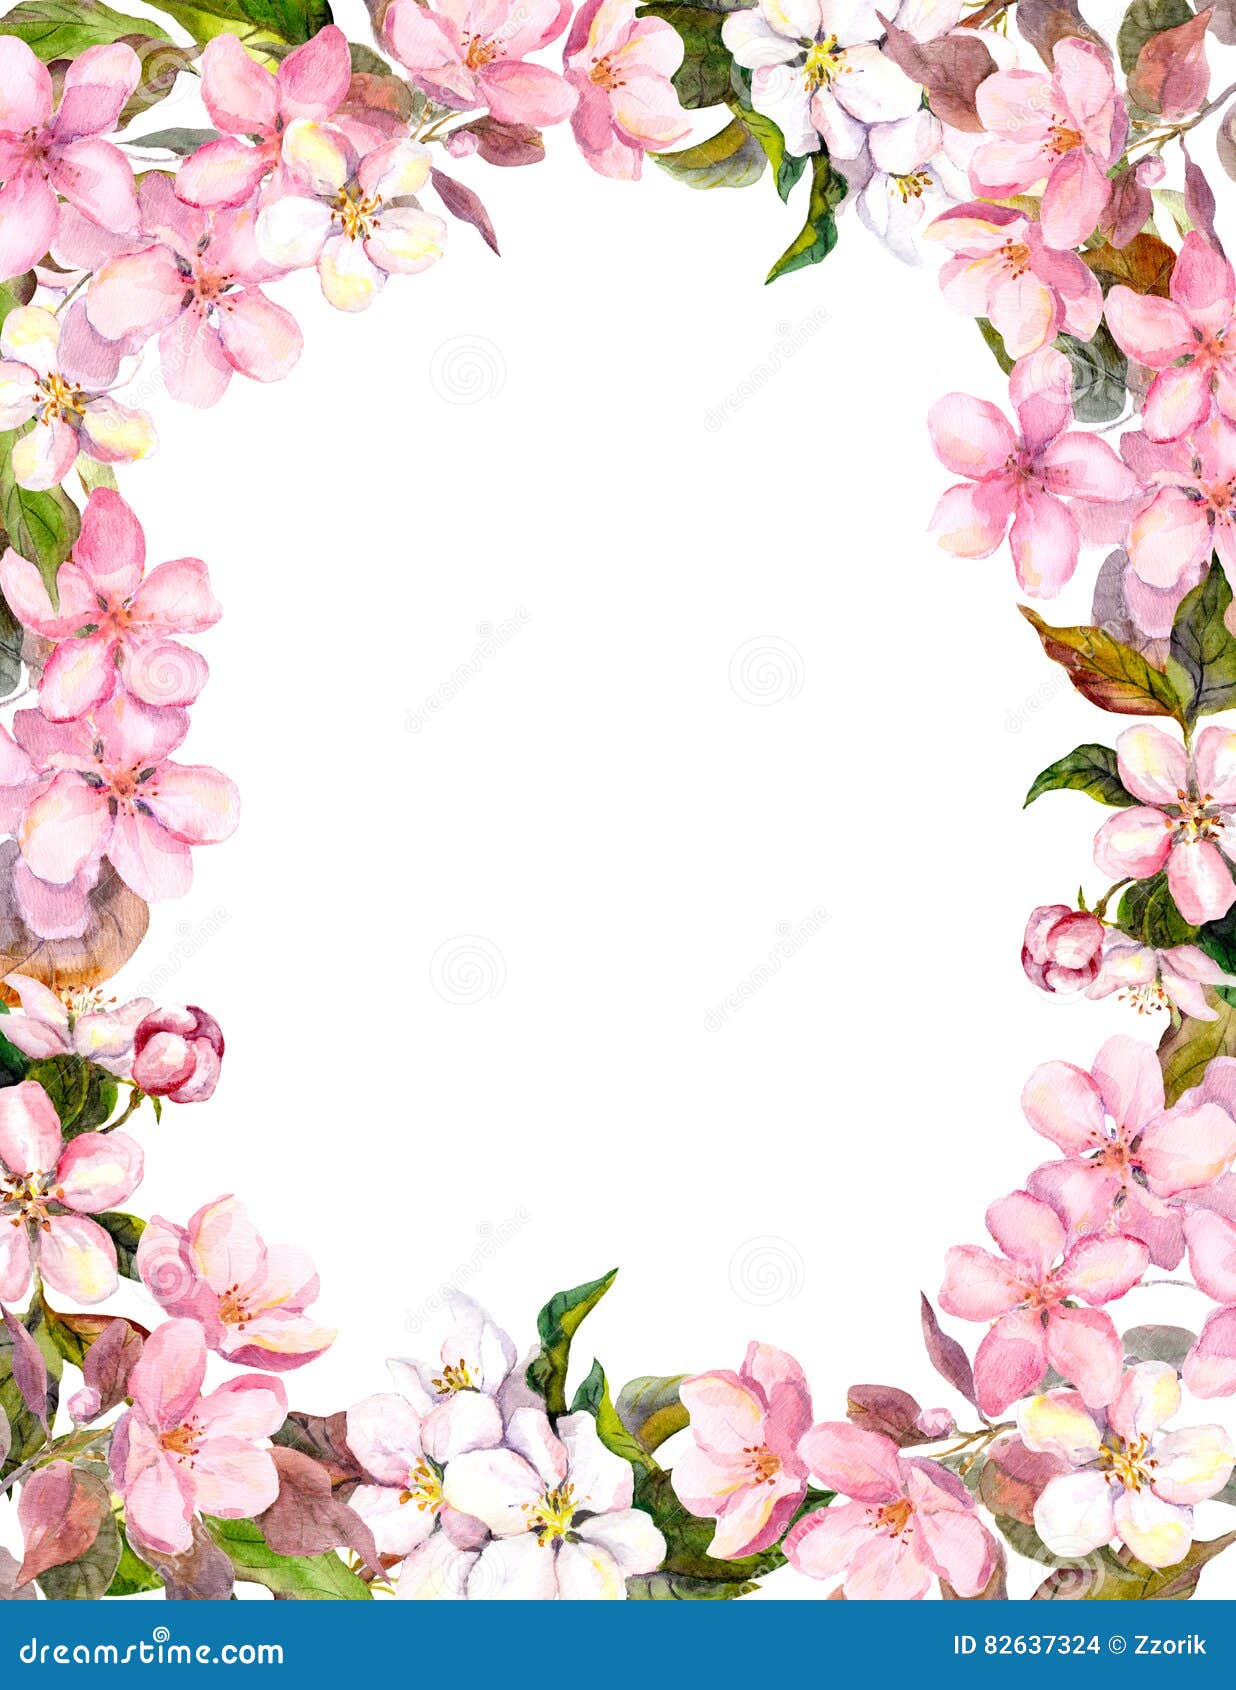 Pink Flowers Apple Cherry Blossom Floral Border For Shabby